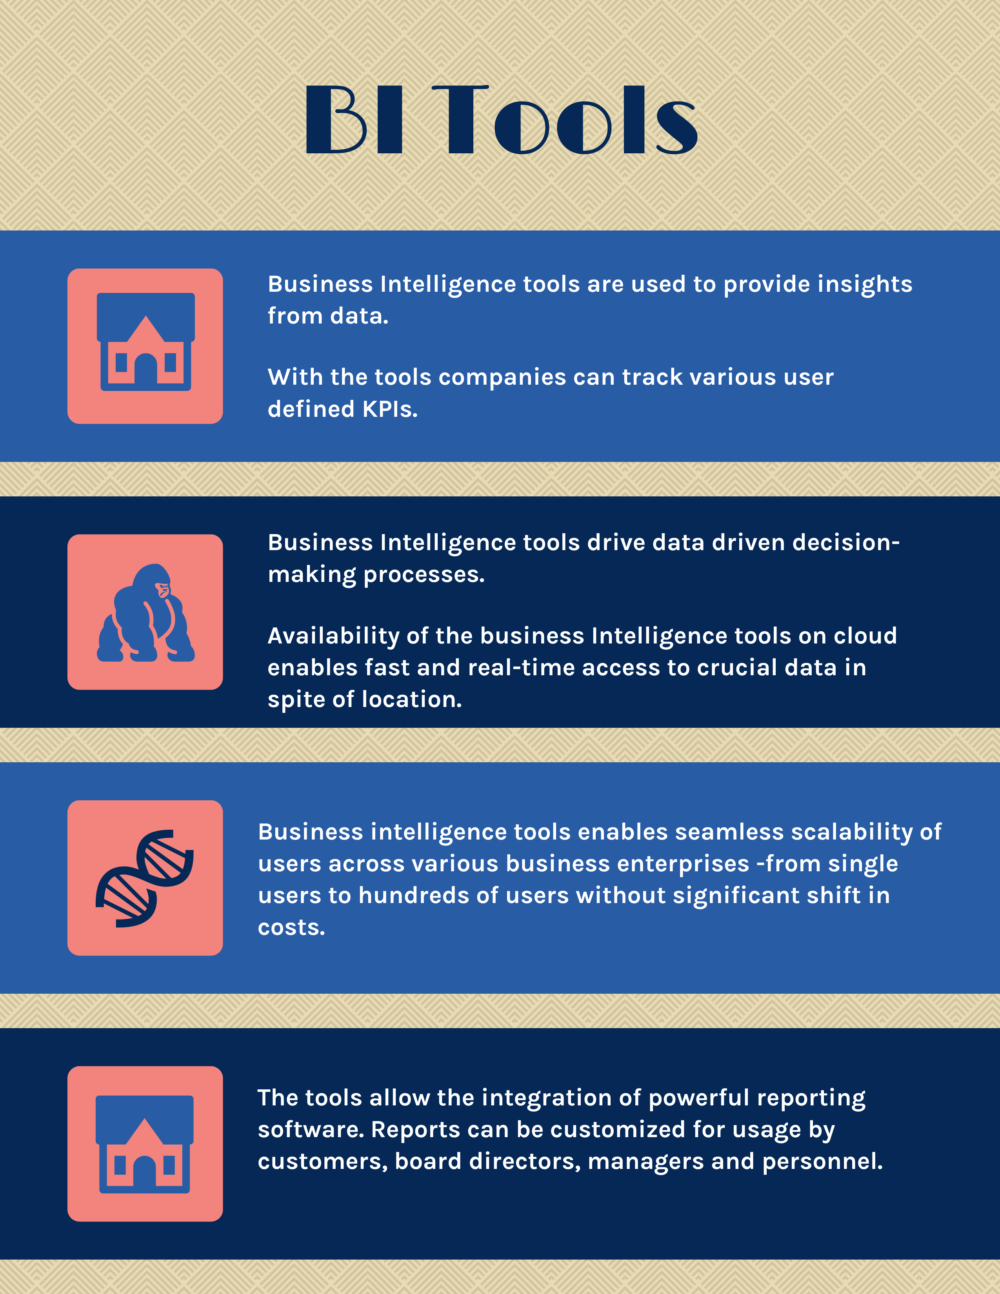 Top Business Intelligence Tools